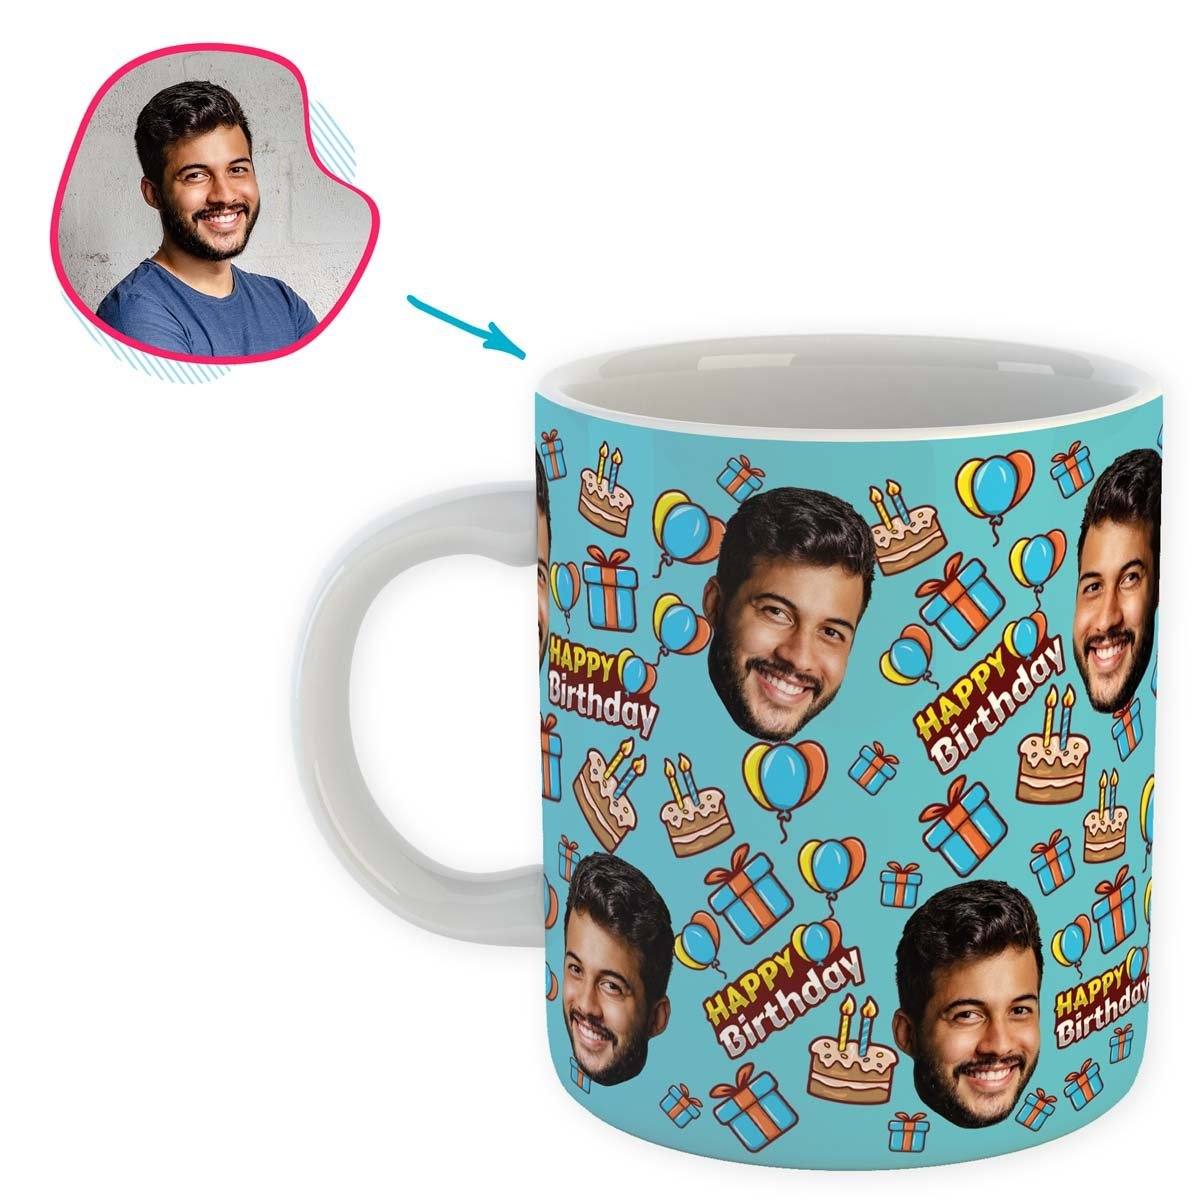 blue Birthday mug personalized with photo of face printed on it